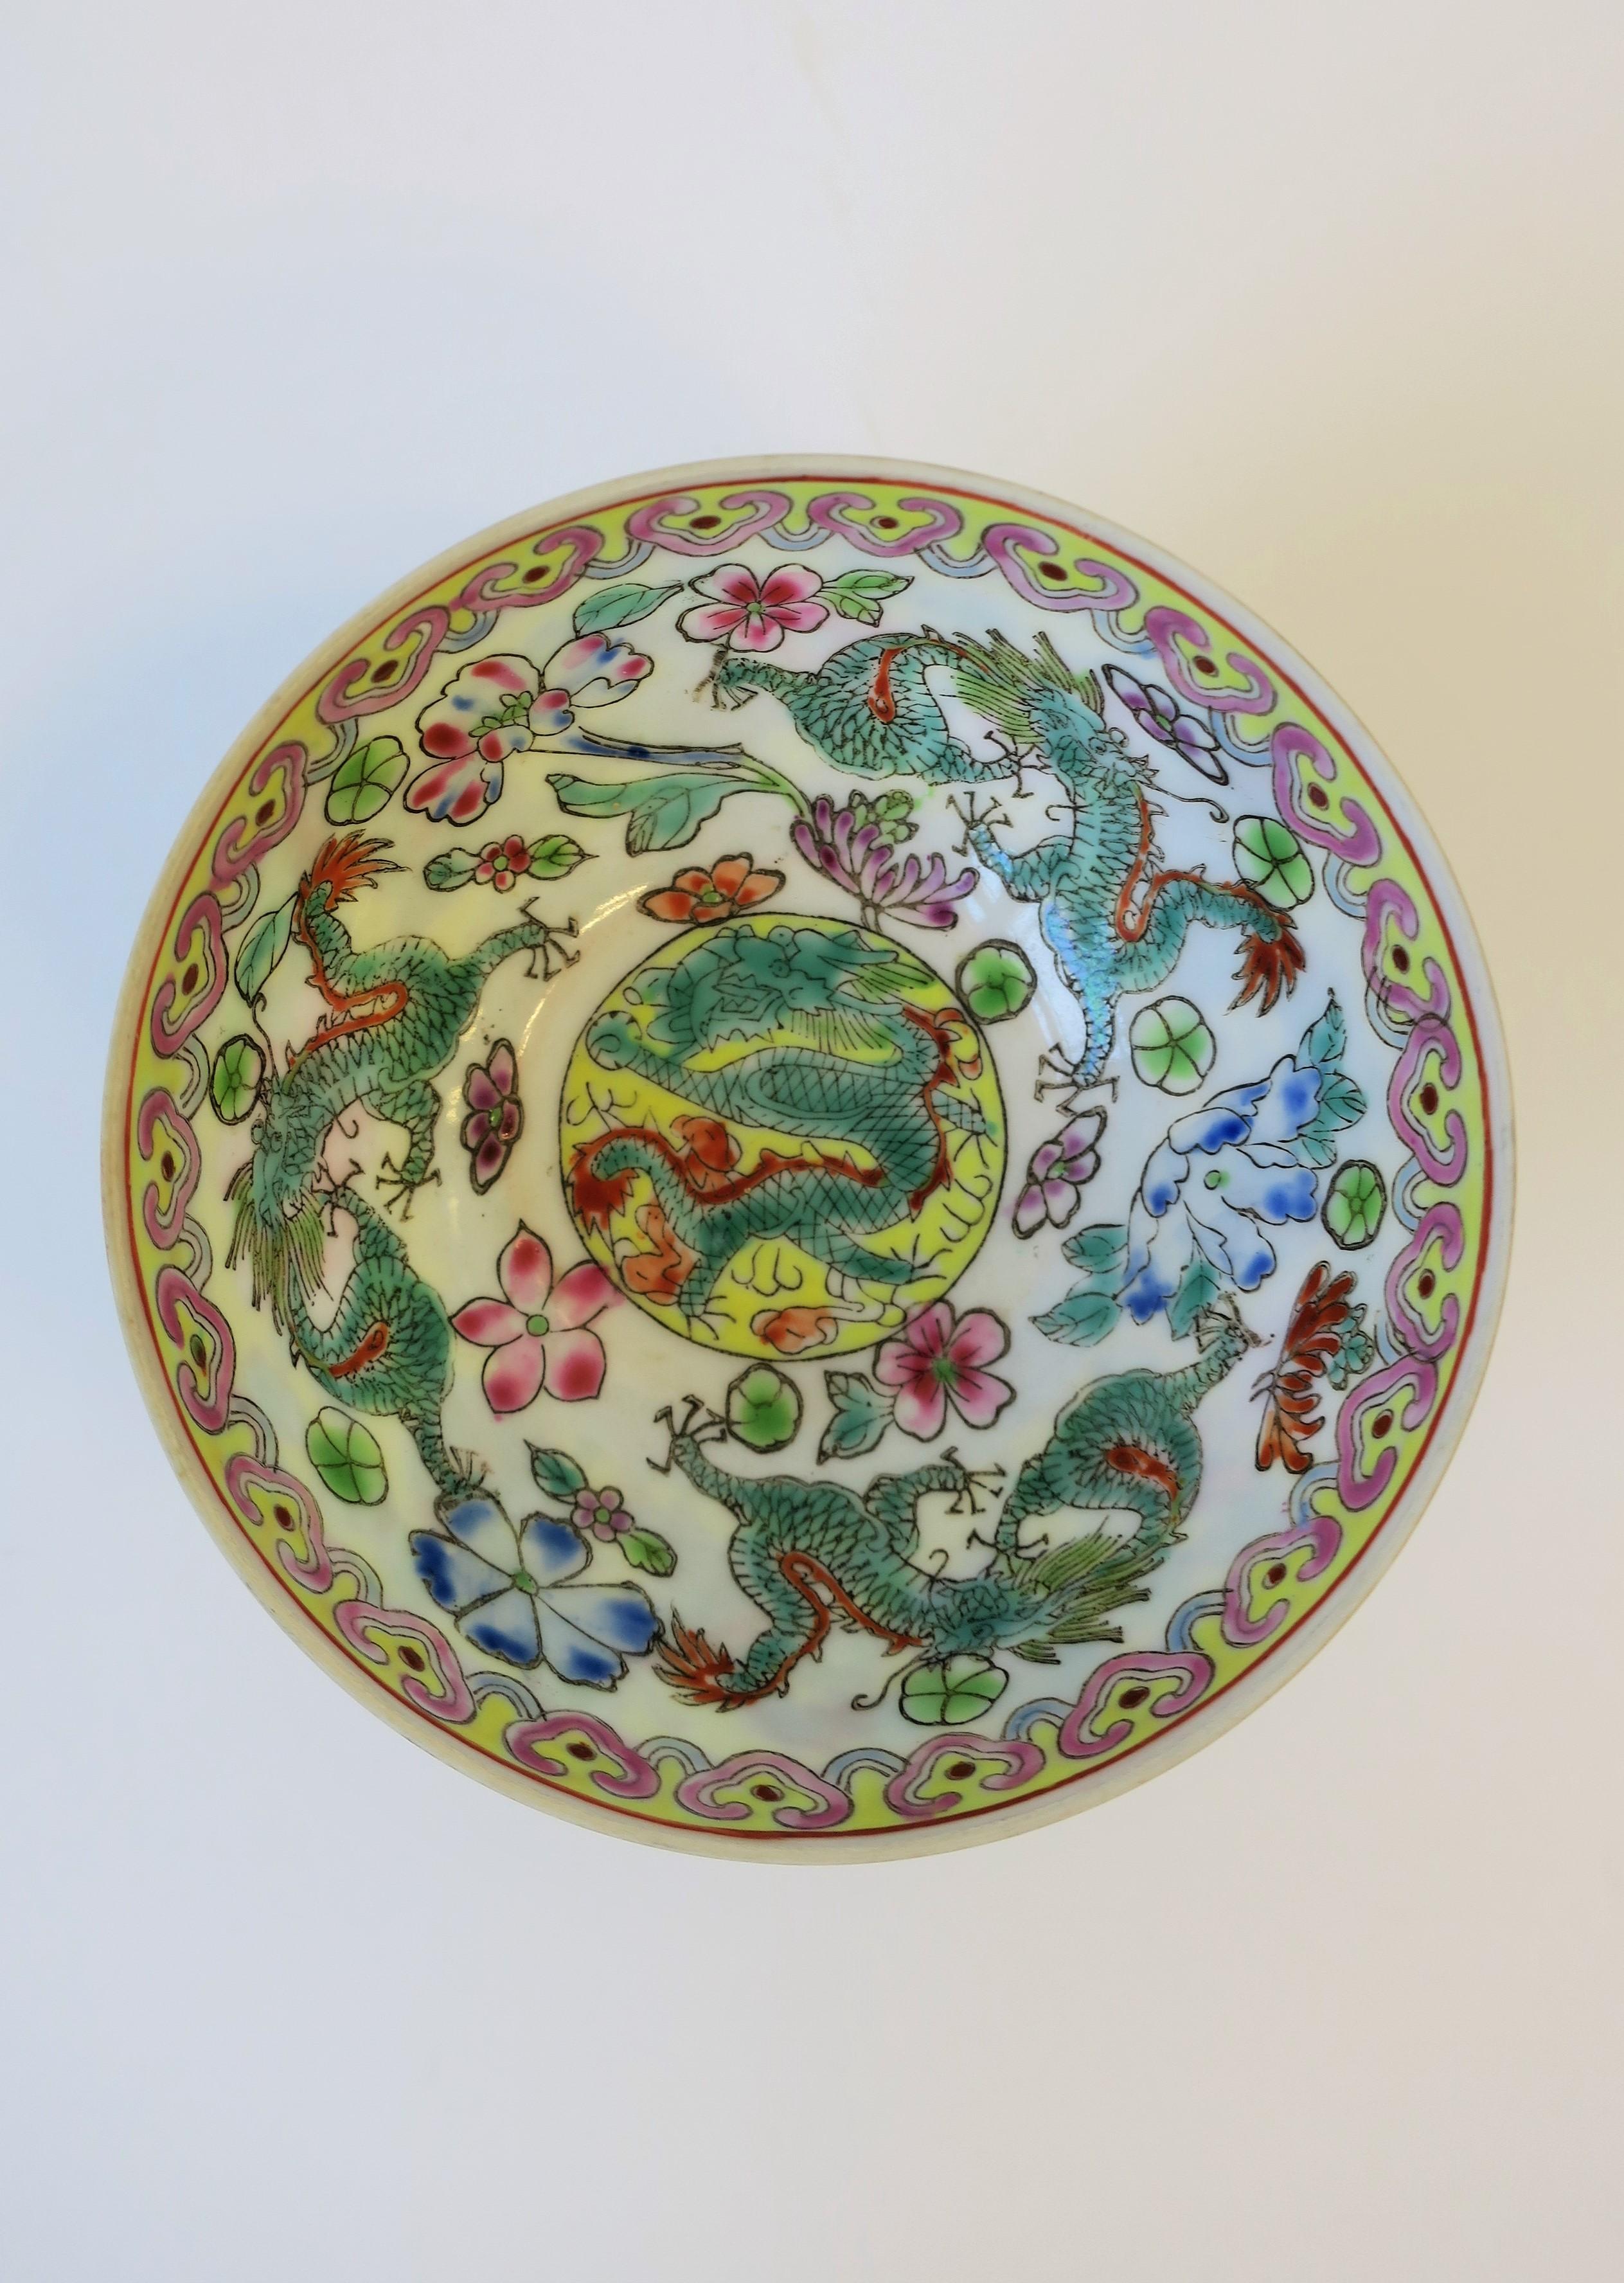 A small, very beautiful, and fine, Chinese porcelain famille Rose hand painted bowl with dragon design, and a carved wood pedestal base, in the style of 18th century version, circa mid-late 20th century, China. Dragons grace the exterior and